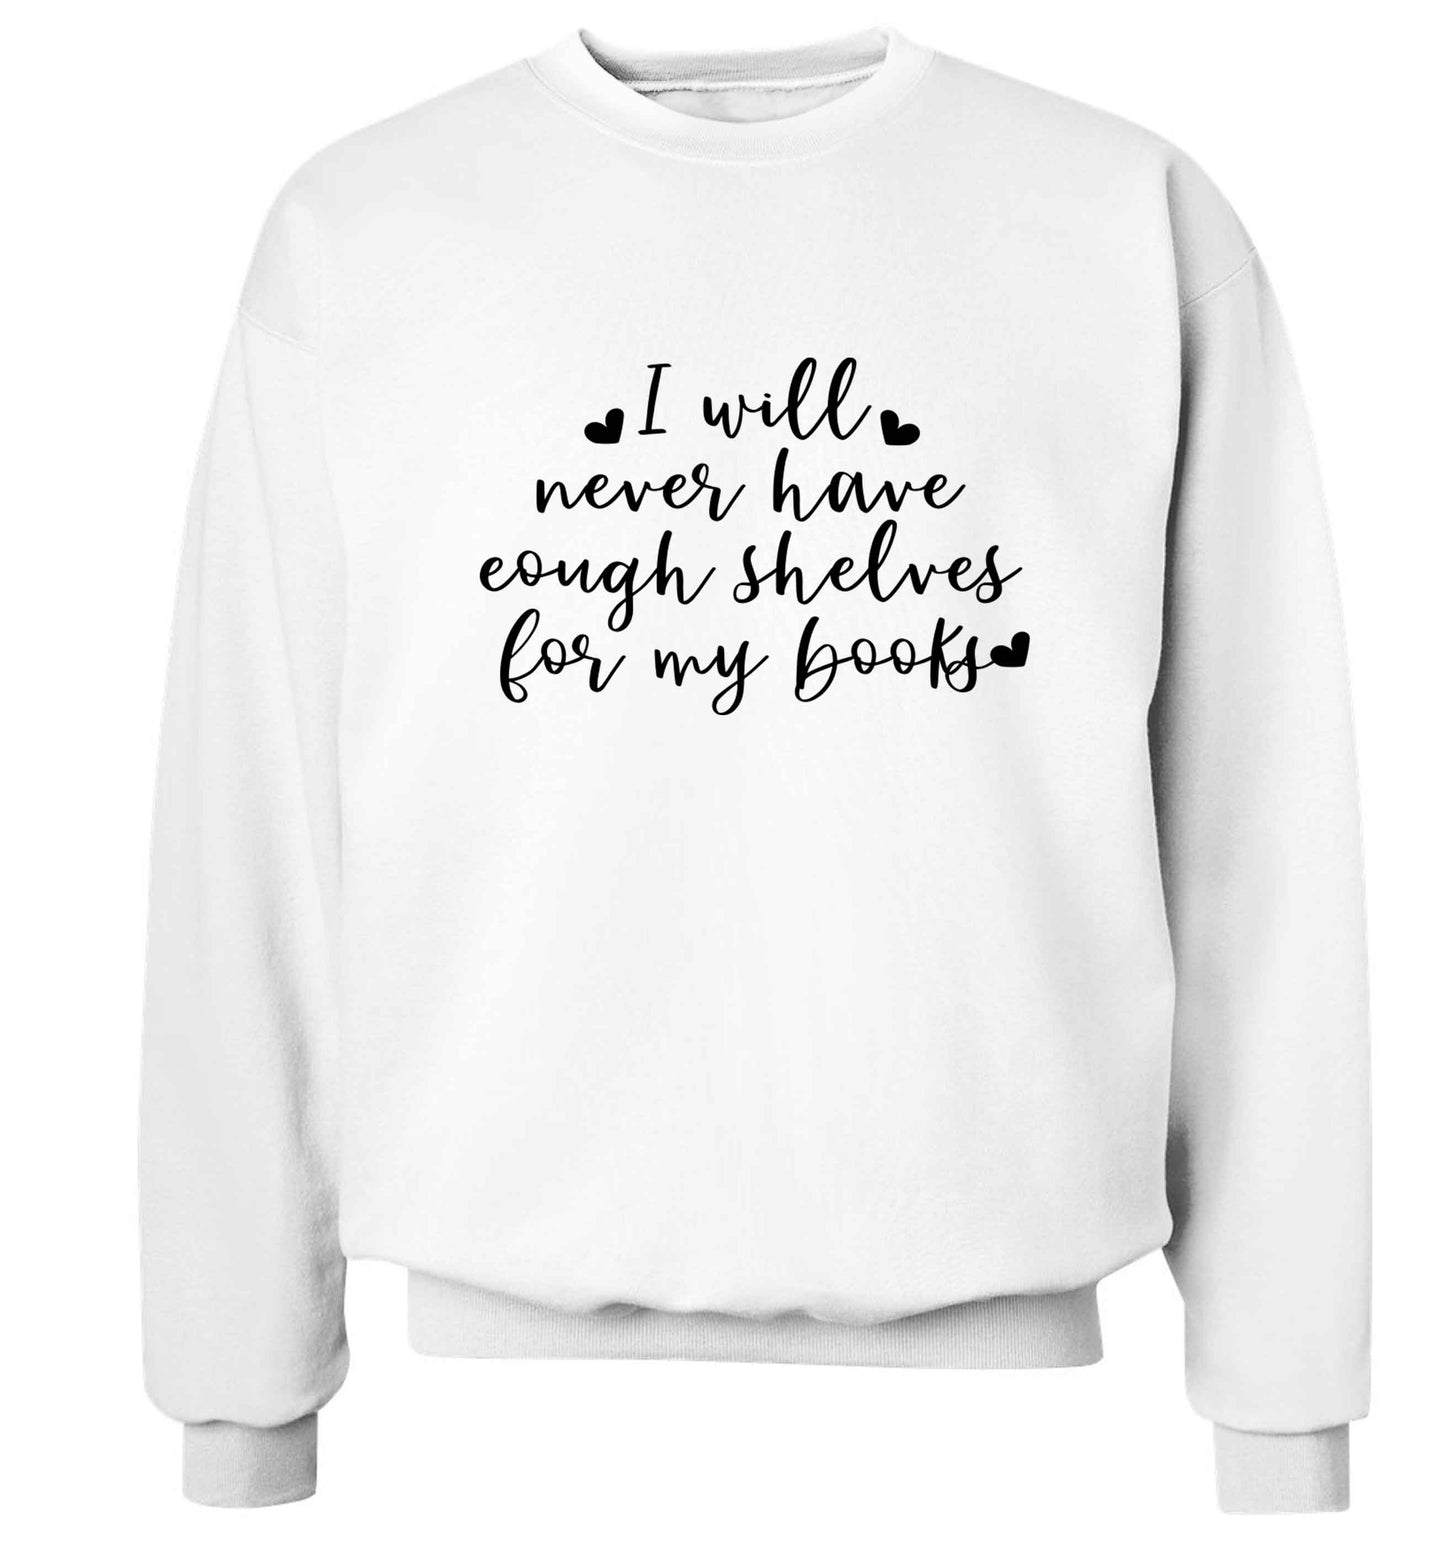 I will never have enough shelves for my books Adult's unisex white Sweater 2XL